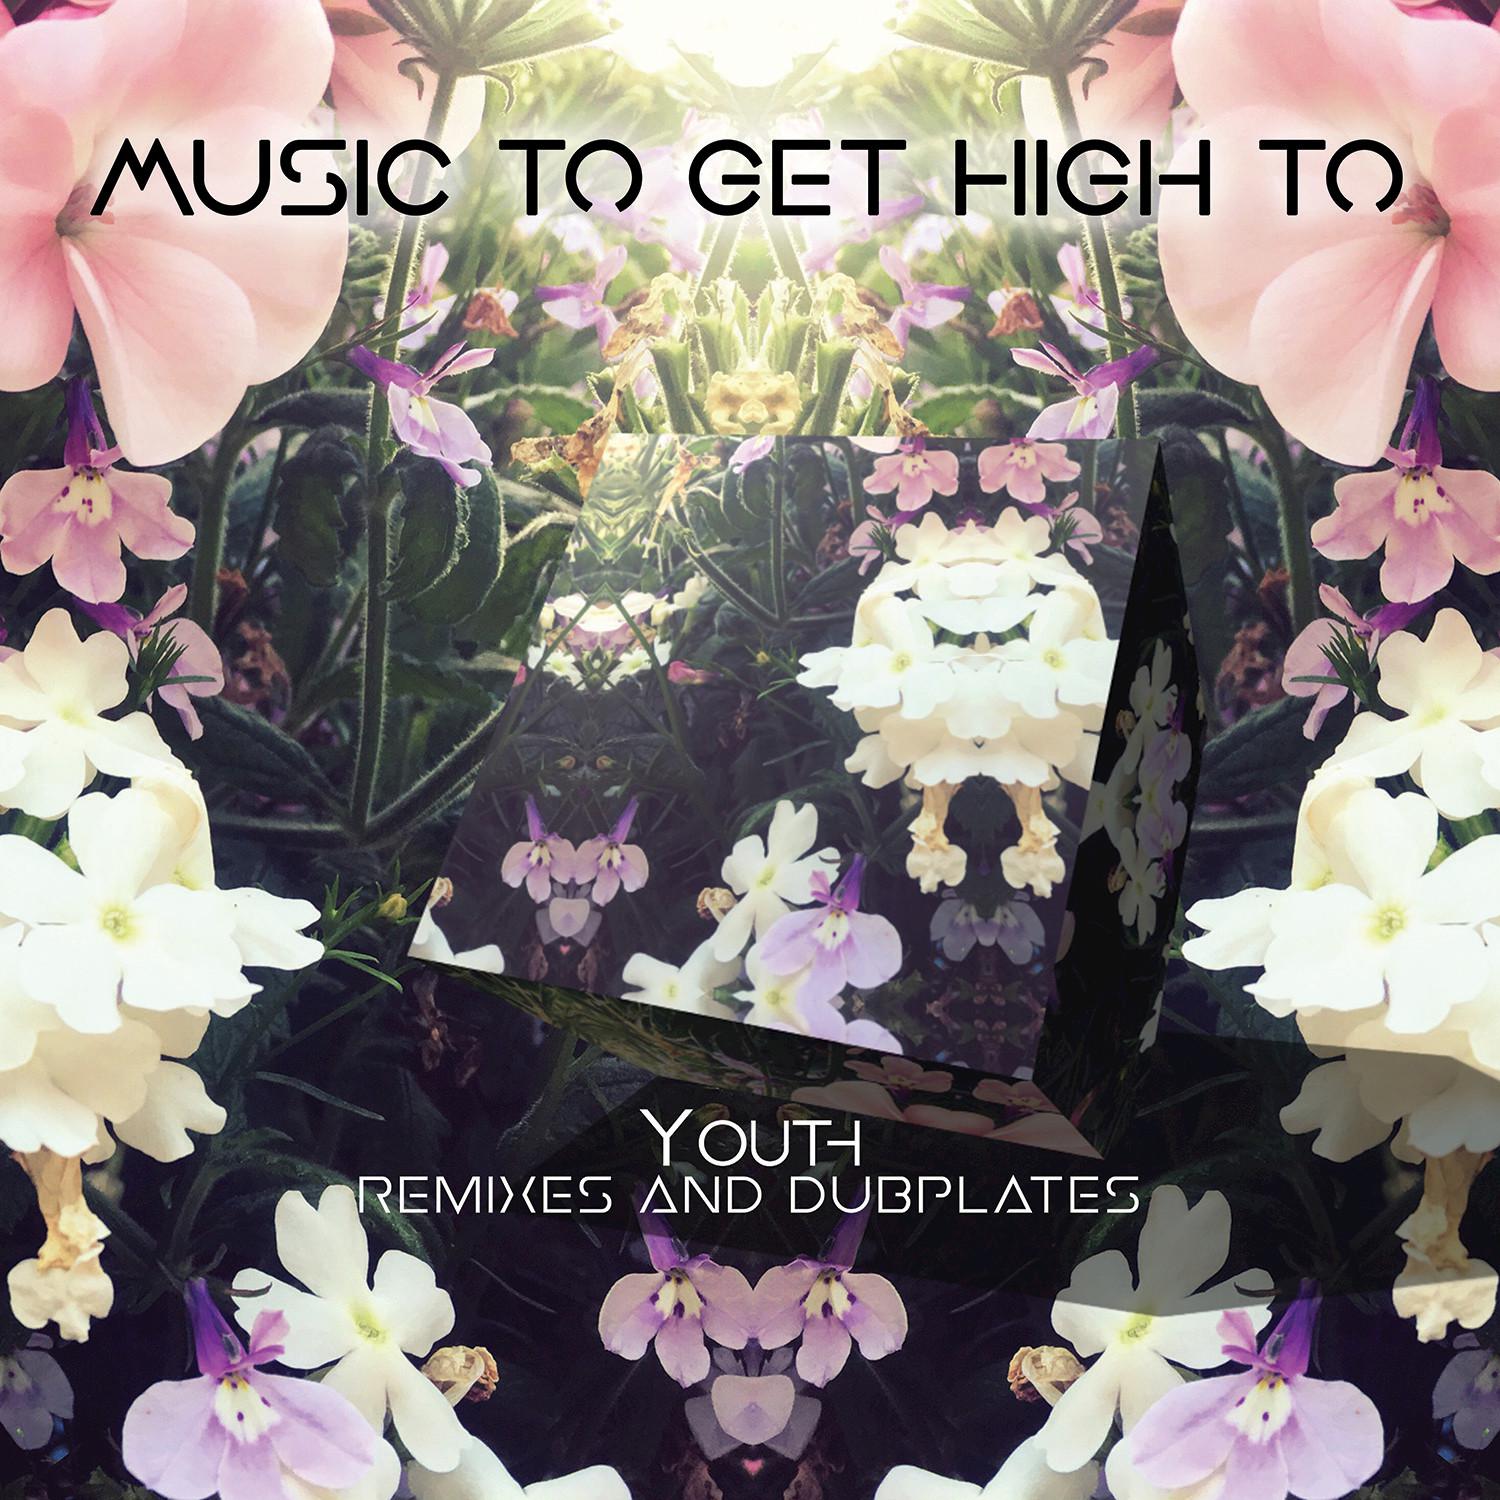 Music To Get High To: Remixes and Dubplates (Compiled by Youth)